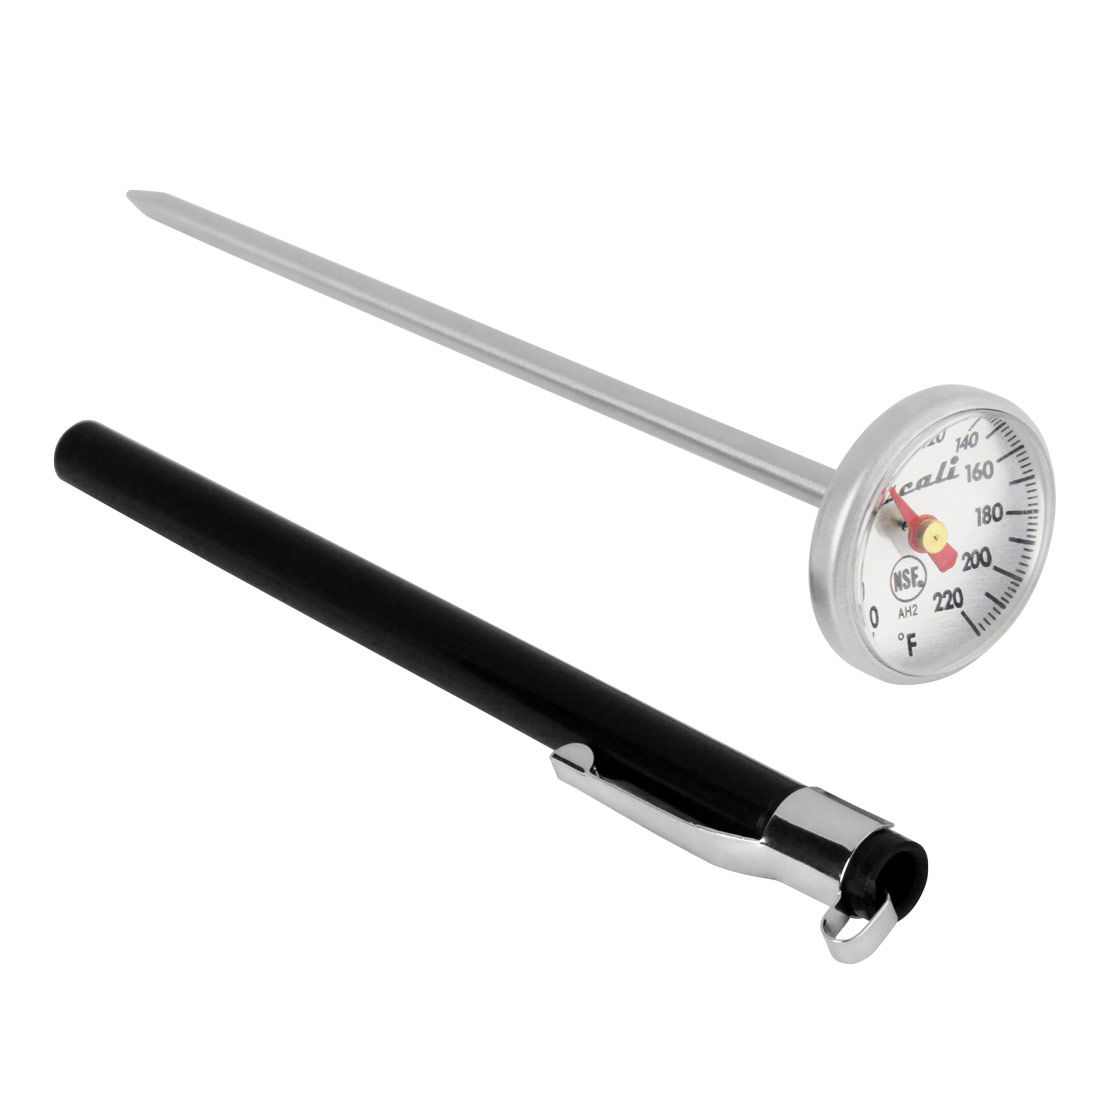 https://www.thepeppermillinc.com/wp-content/uploads/2021/06/ah2-instant-read-dial-thermometer_angle.jpg